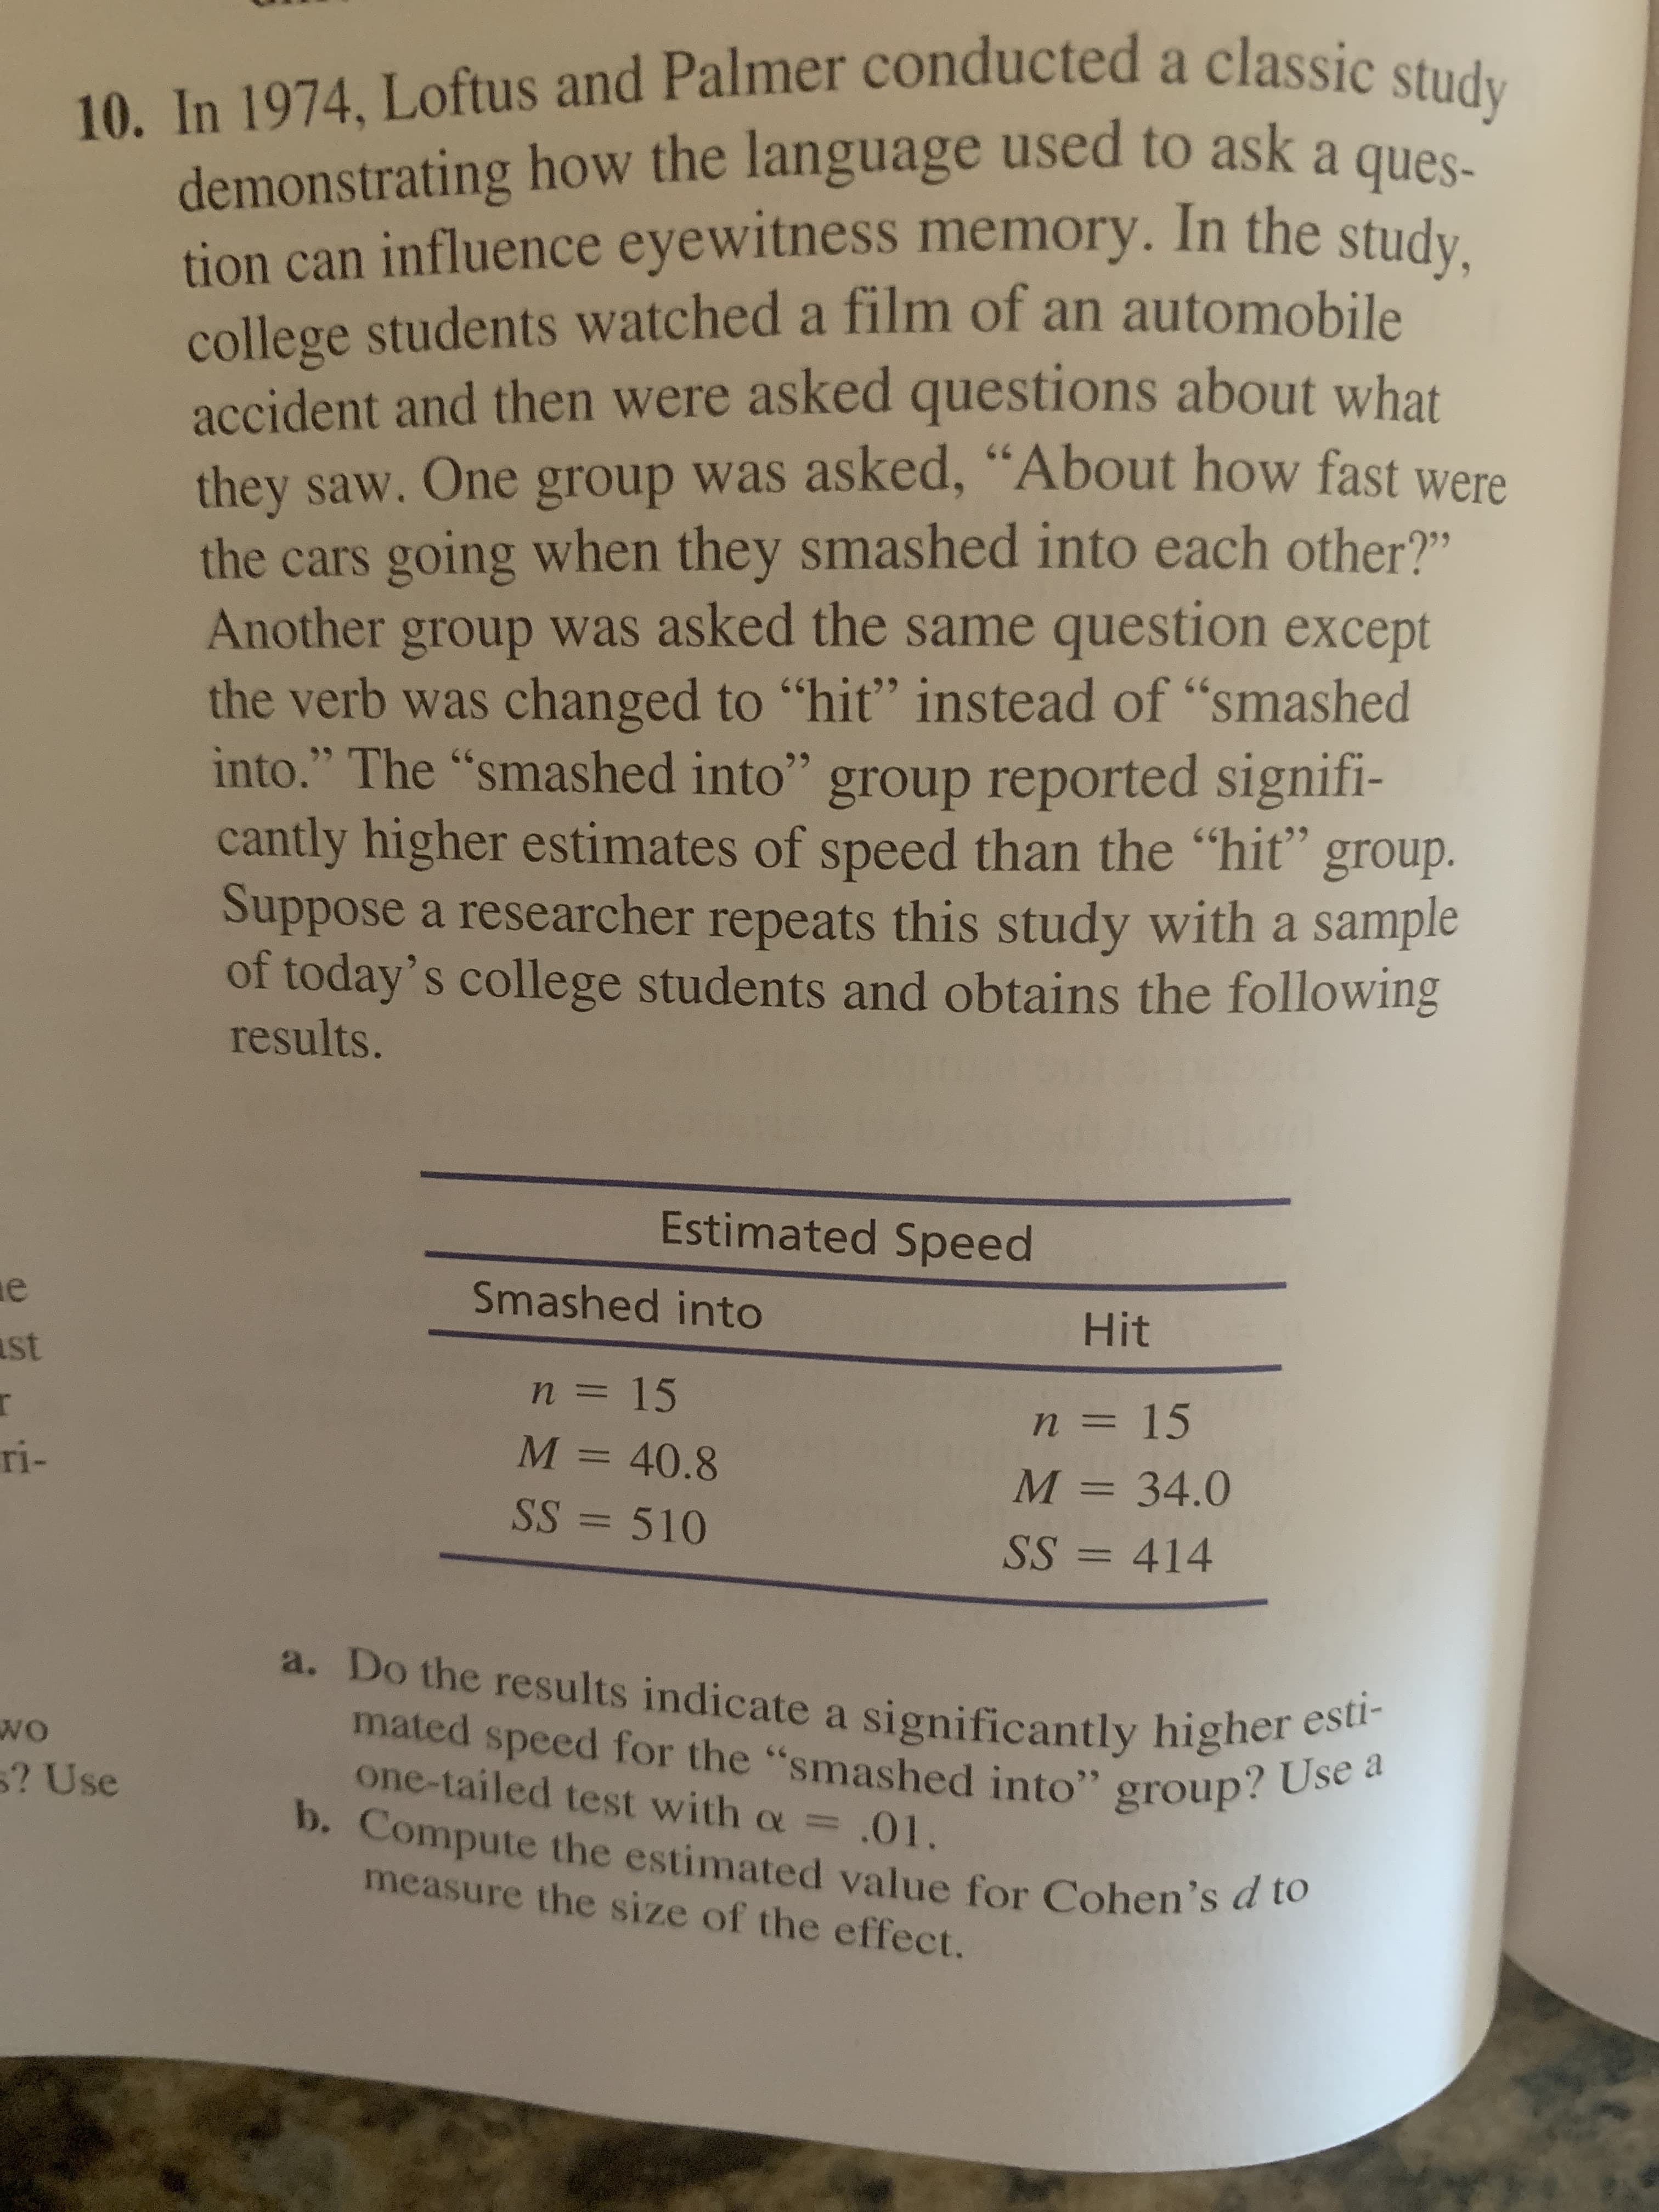 10. In 1974, Loftus and Palmer conducted a classic study
demonstrating how the language used to ask a ques-
tion can influence eyewitness memory. In the study.
college students watched a film of an automobile
accident and then were asked questions about what
they saw. One group was asked, “About how fast were
the cars going when they smashed into each other?"
Another group was asked the same question except
the verb was changed to "hit" instead of "smashed
into." The "smashed into" group reported signifi-
cantly higher estimates of speed than the "hit" group.
Suppose a researcher repeats this study with a sample
of today's college students and obtains the following
results.
66
66
66
Estimated Speed
Smashed into
ast
Hit
n = 15
n = 15
ri-
M = 40.8
M = 34.0
SS = 510
SS = 414
a. Do the results indicate a significantly higher esti-
mated speed for the "smashed into" group? Use a
one-tailed test with a =.01.
5? Use
b. Compute the estimated value for Cohen's d to
measure the size of the effect.
